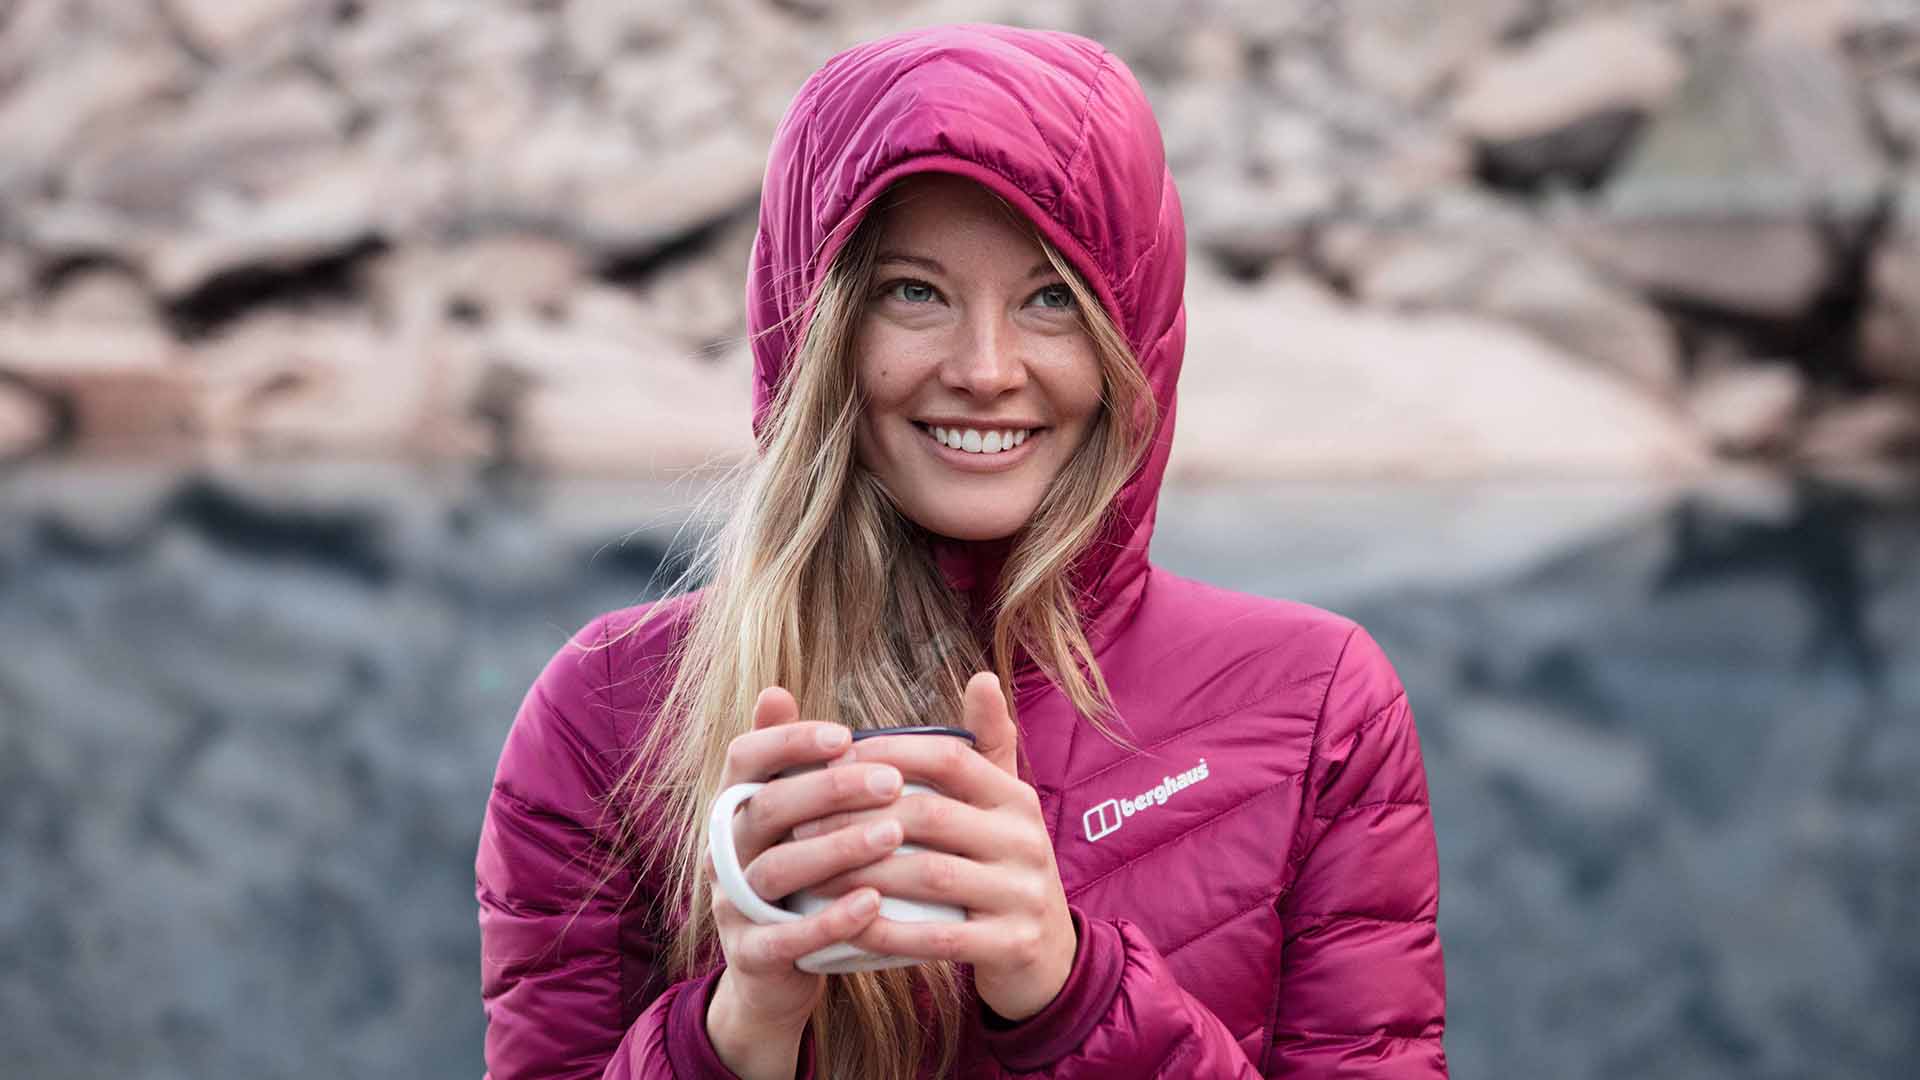 Berghaus invests in multimillion pound ad campaign - Prolific North